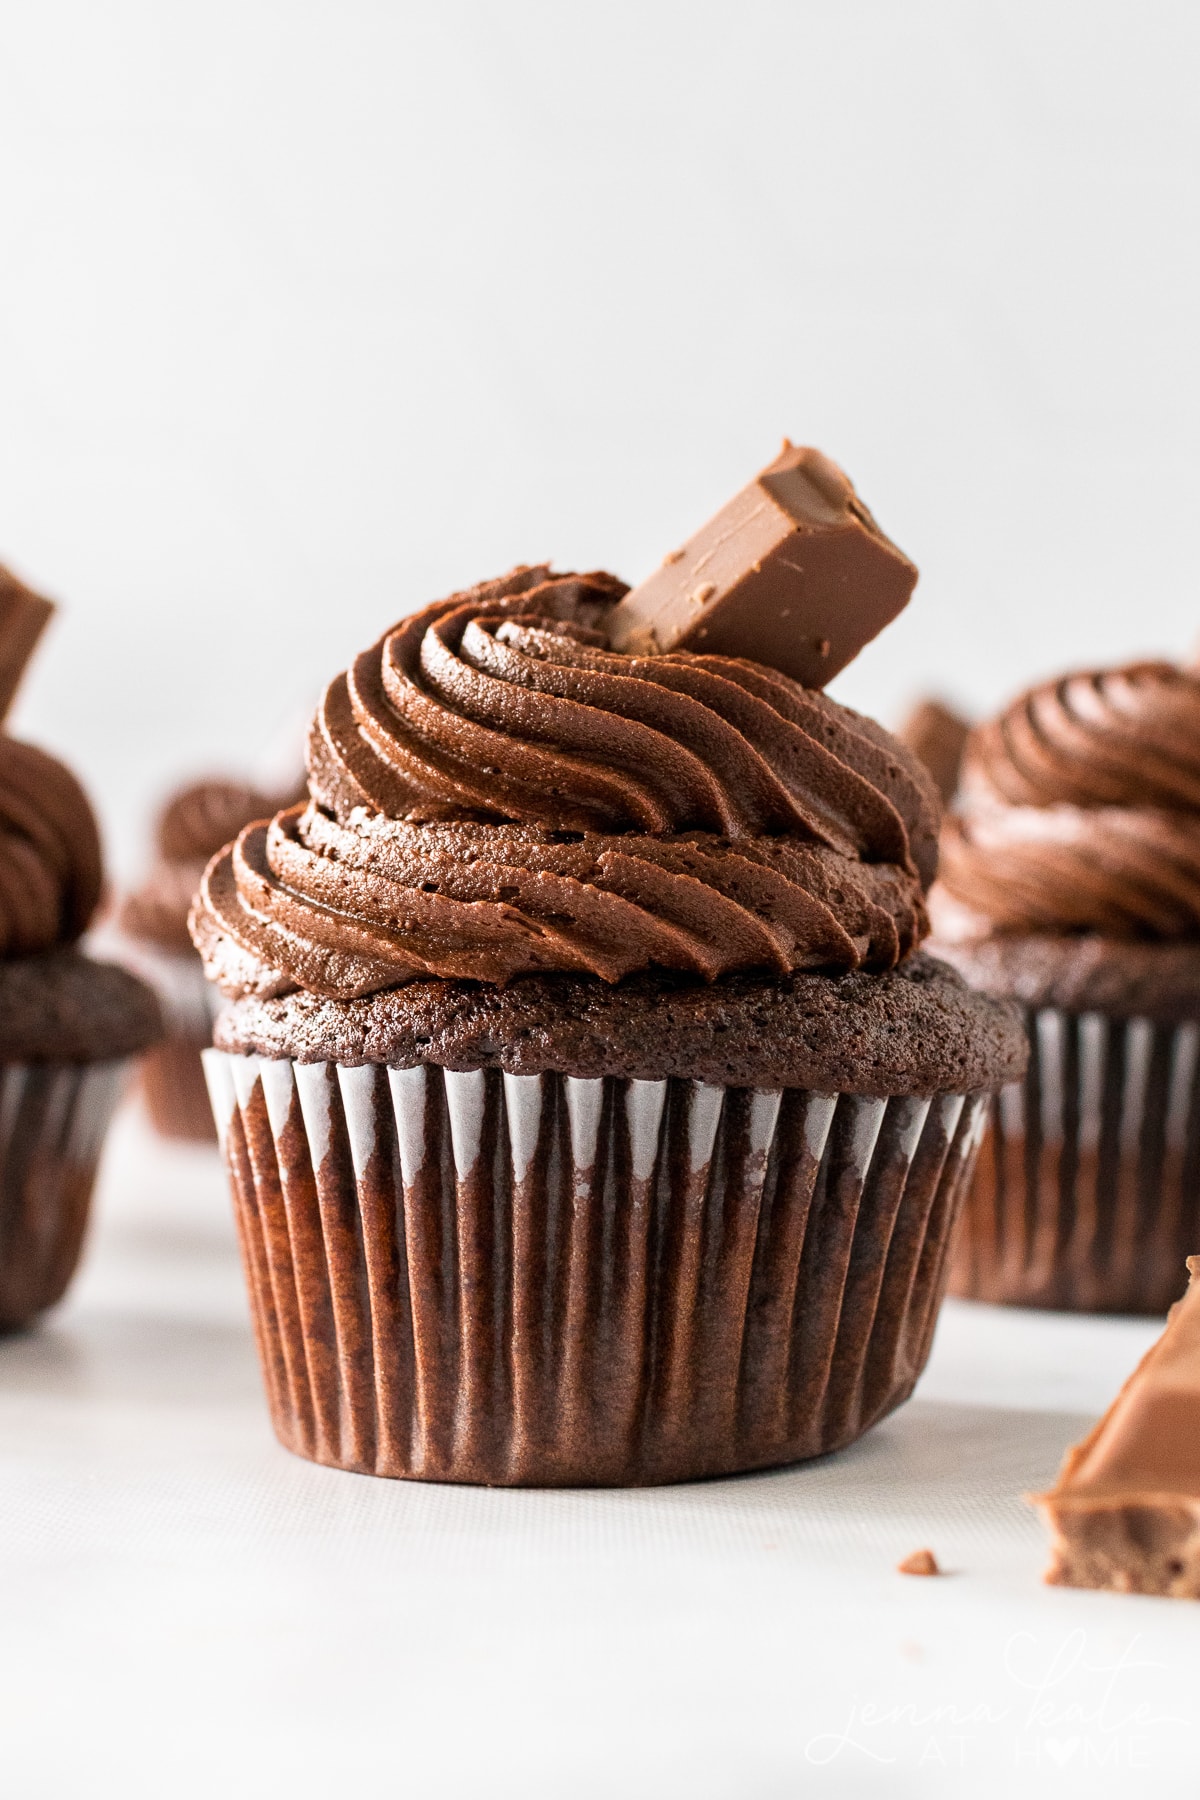 moist chocolate cupcake with buttercream frosting